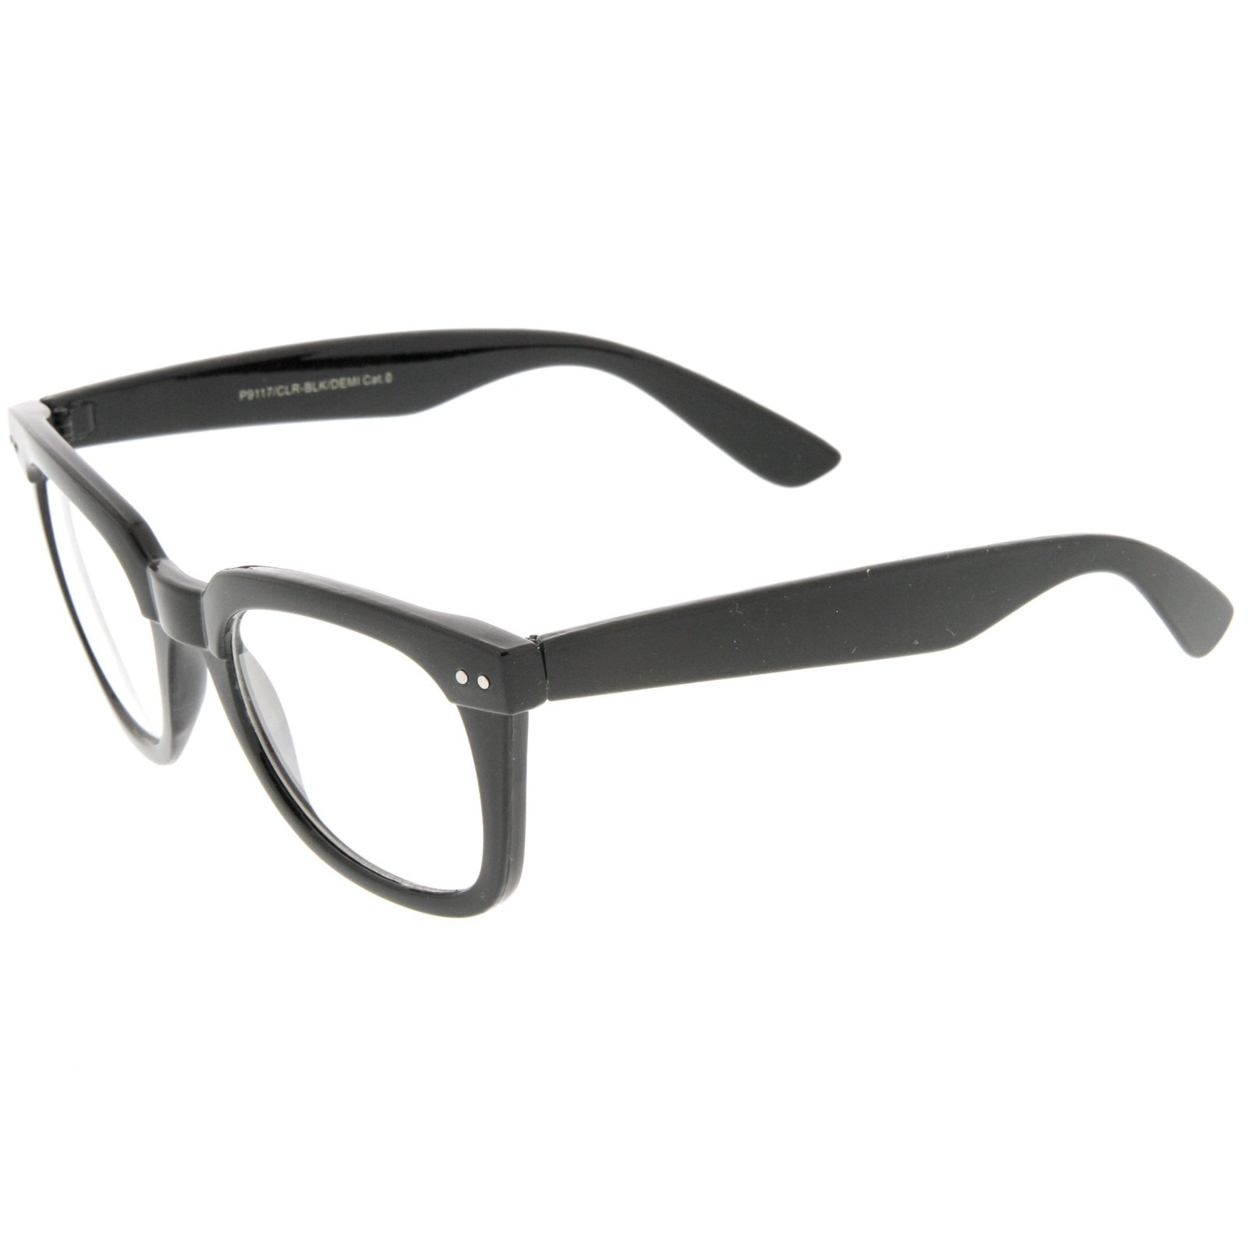 Modern Chunky Frame Wide Temple Clear Lens Square Horn Rimmed Glasses 51mm - Black / Clear